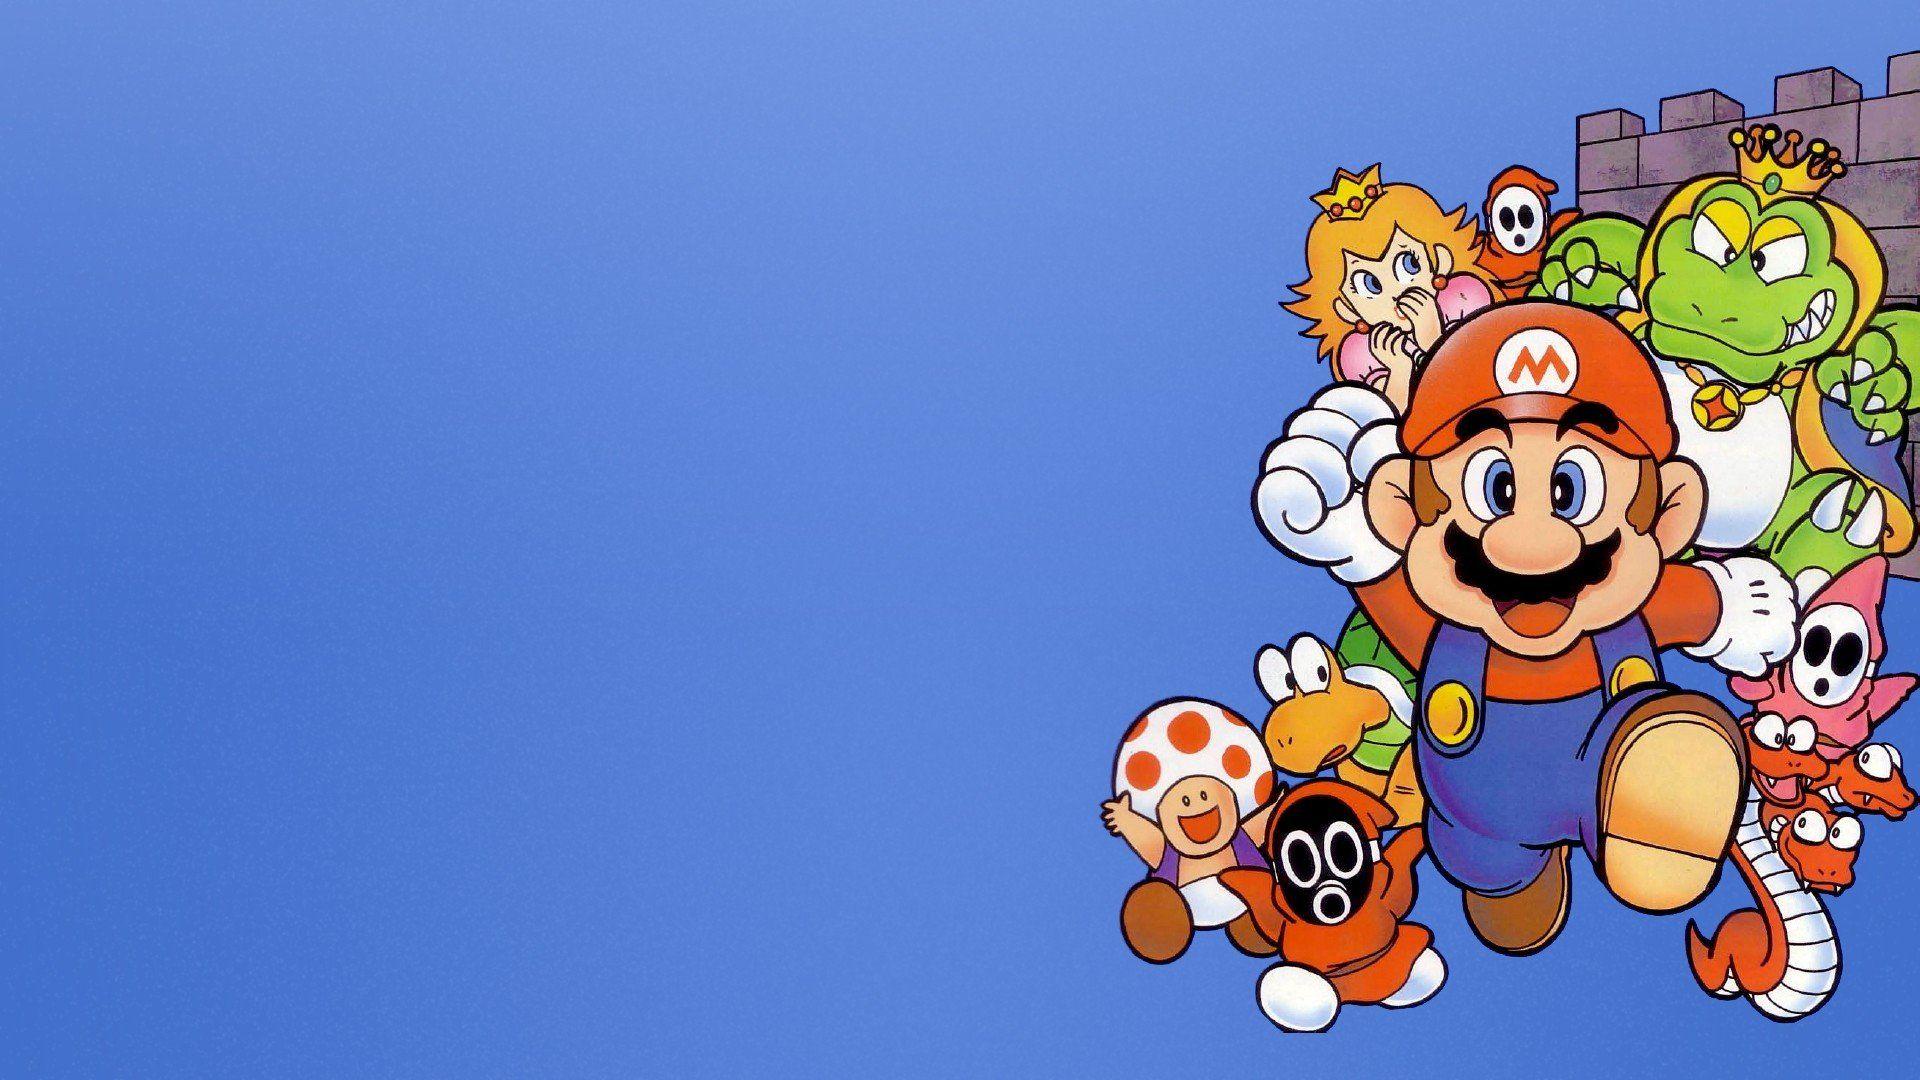 Nintendo Collage Wallpapers Top Free Nintendo Collage Backgrounds 